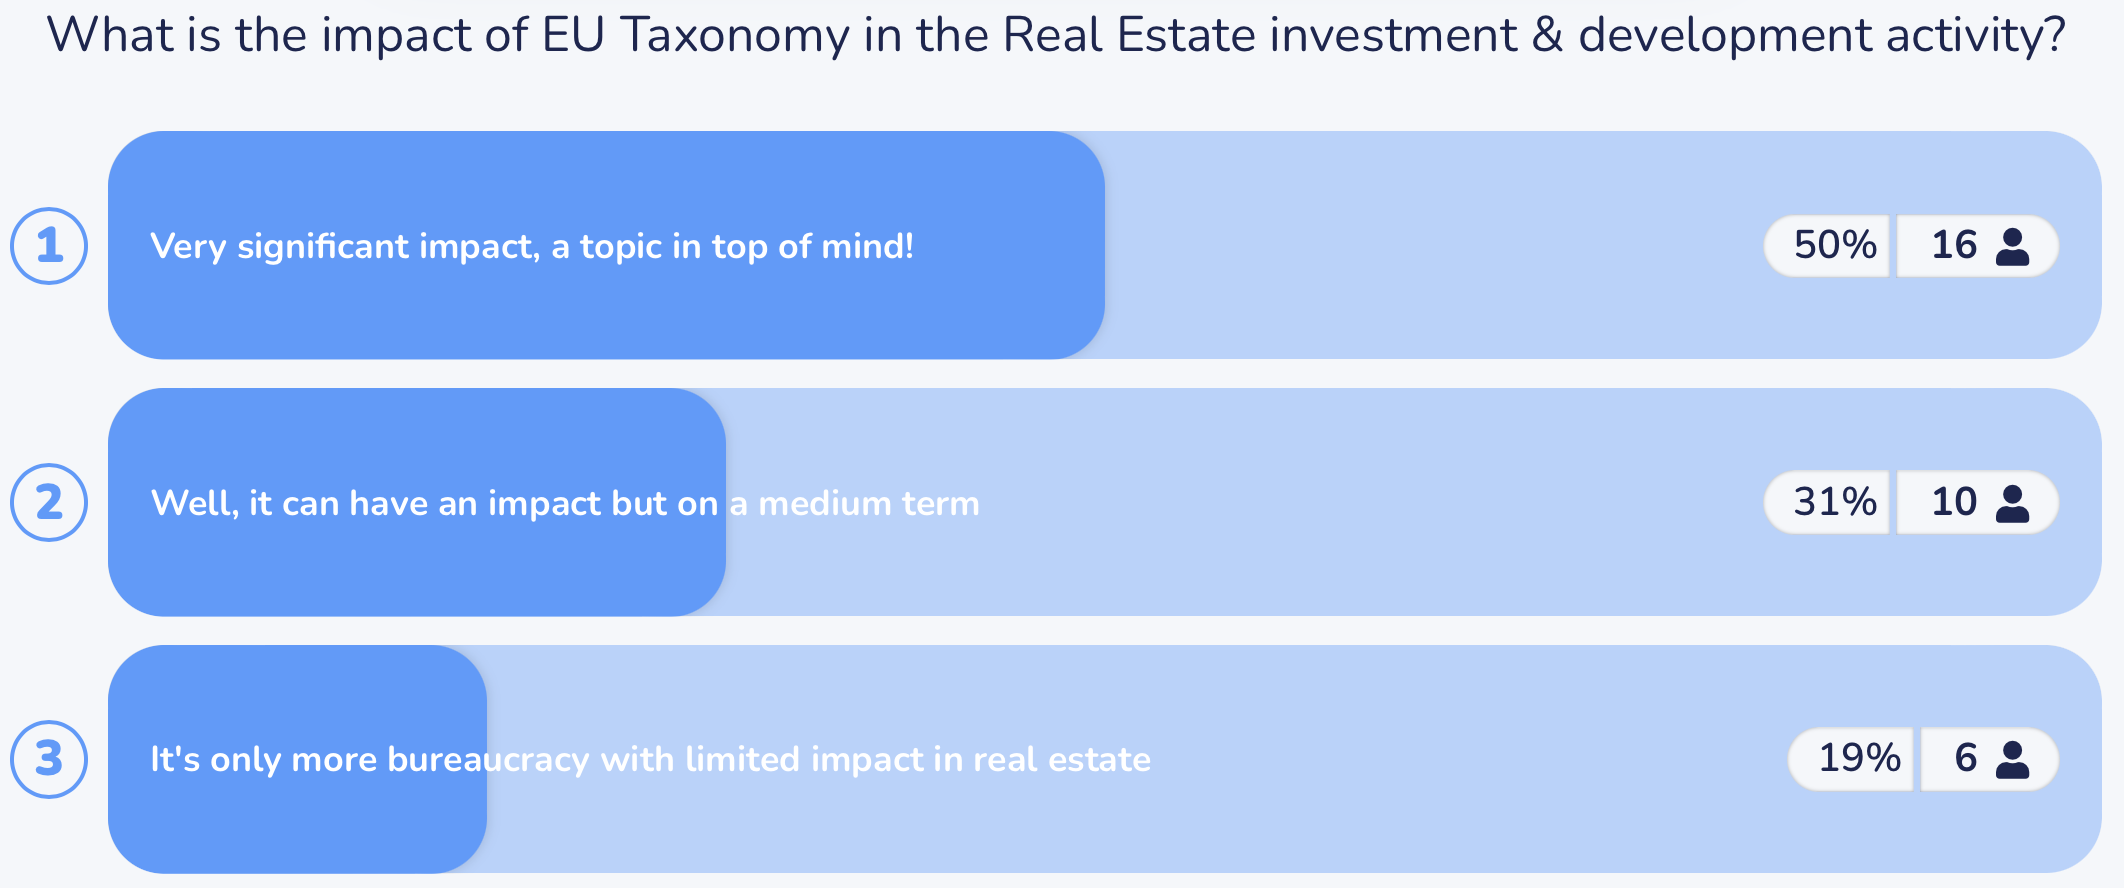 ONLINE POLL: HALF THE PARTICIPANTS CONSIDER THAT THE EU TAXONOMY WILL HAVE A VERY SIGNIFICANT IMPACT IN THE REAL ESTATE INVESTMENT ACTIVITY